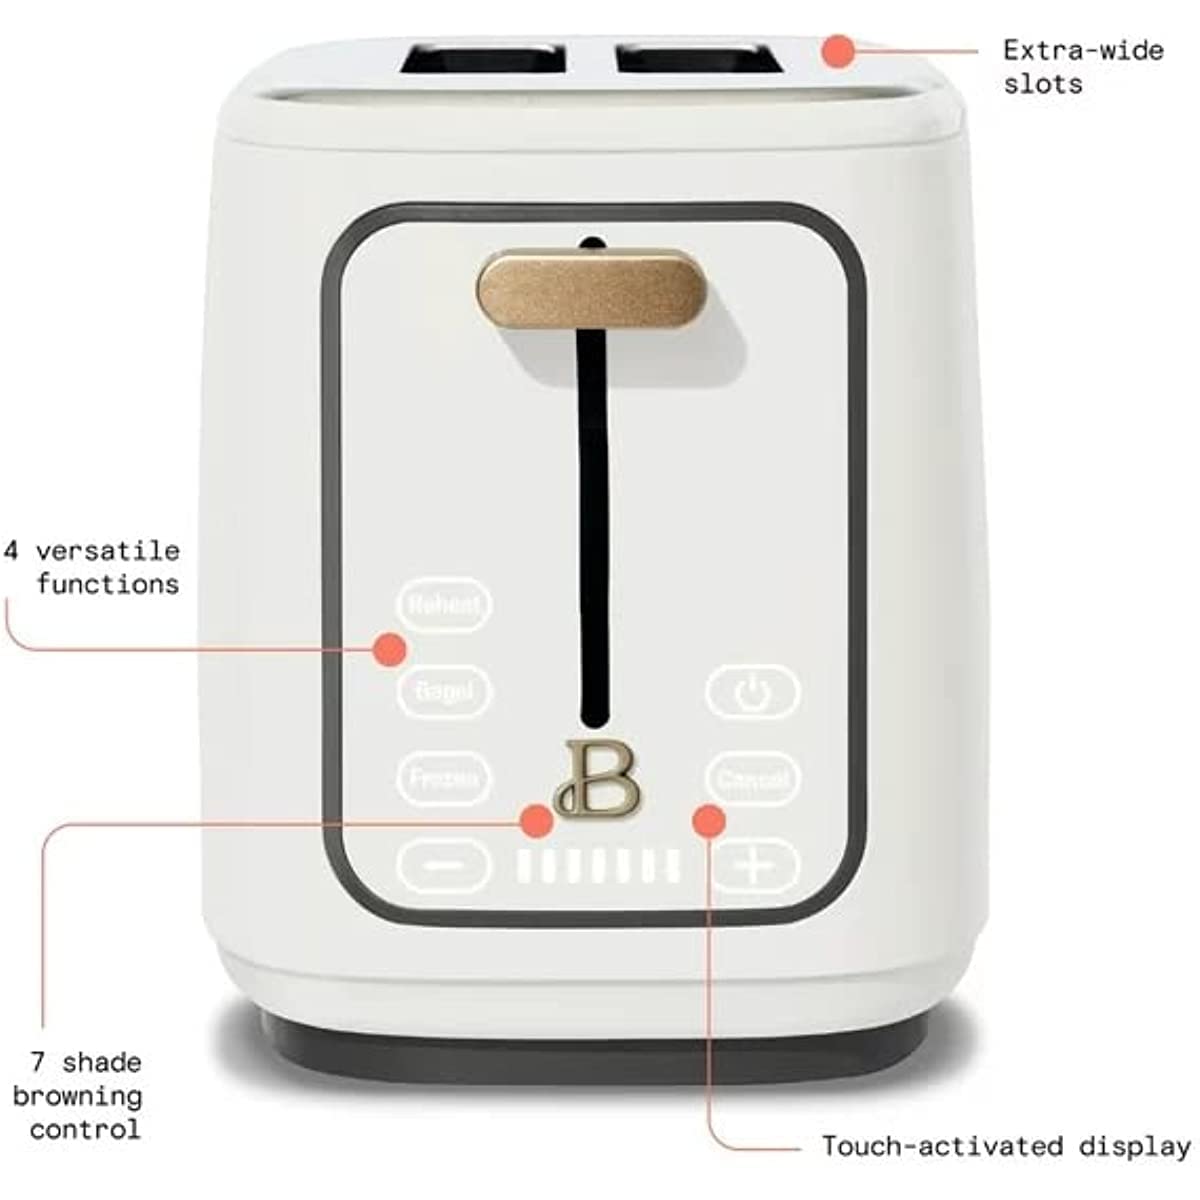 2 Slice Touchscreen Toaster, White Icing by Drew Barrymore (white)